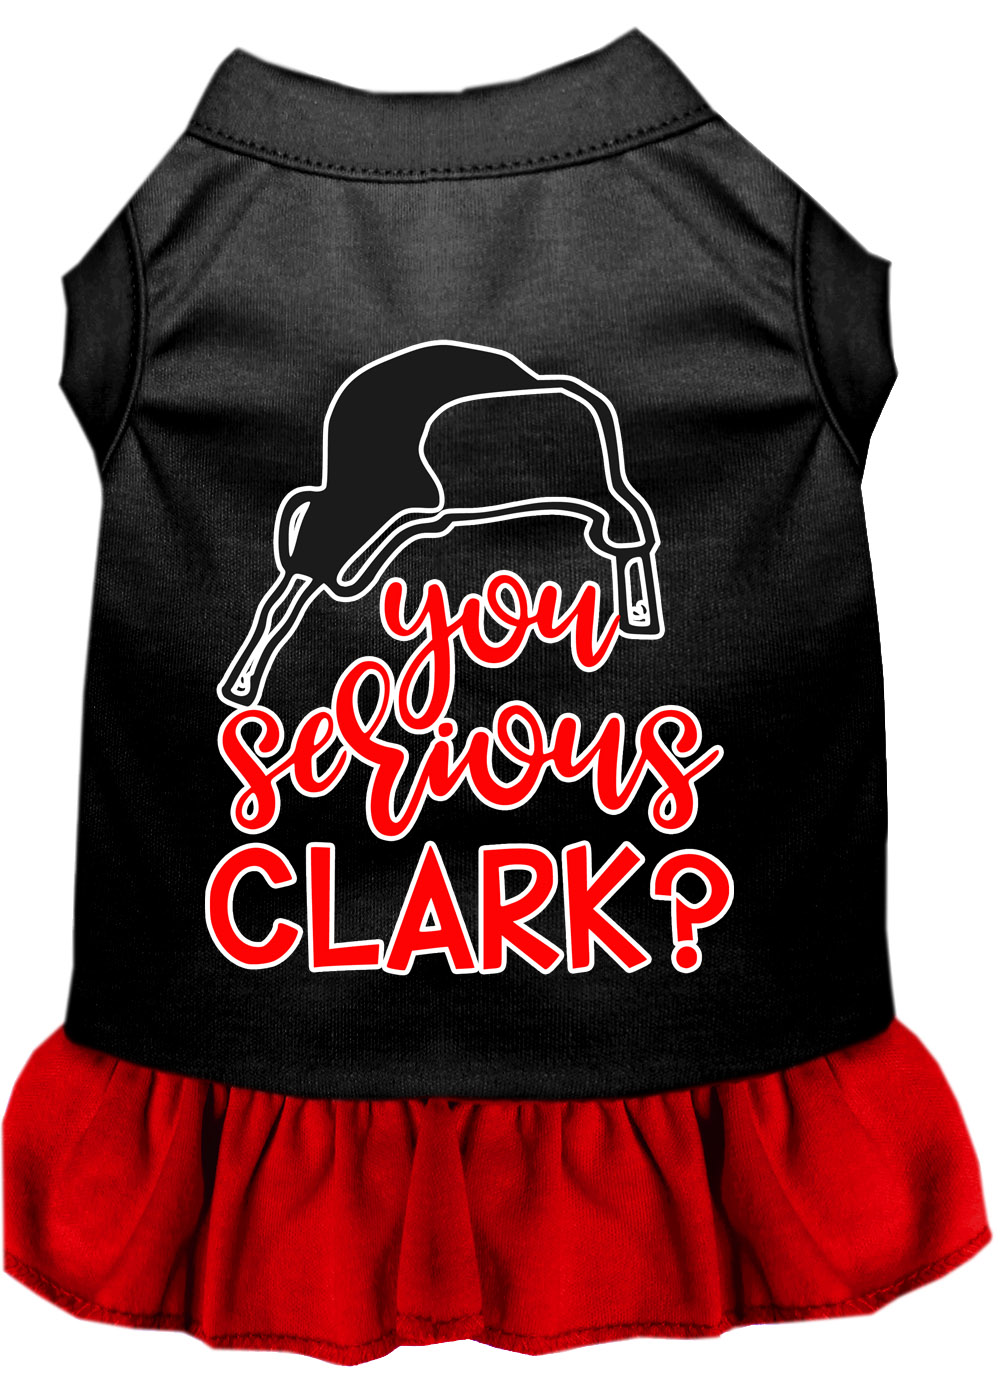 You Serious Clark? Screen Print Dog Dress Black with Red XXL